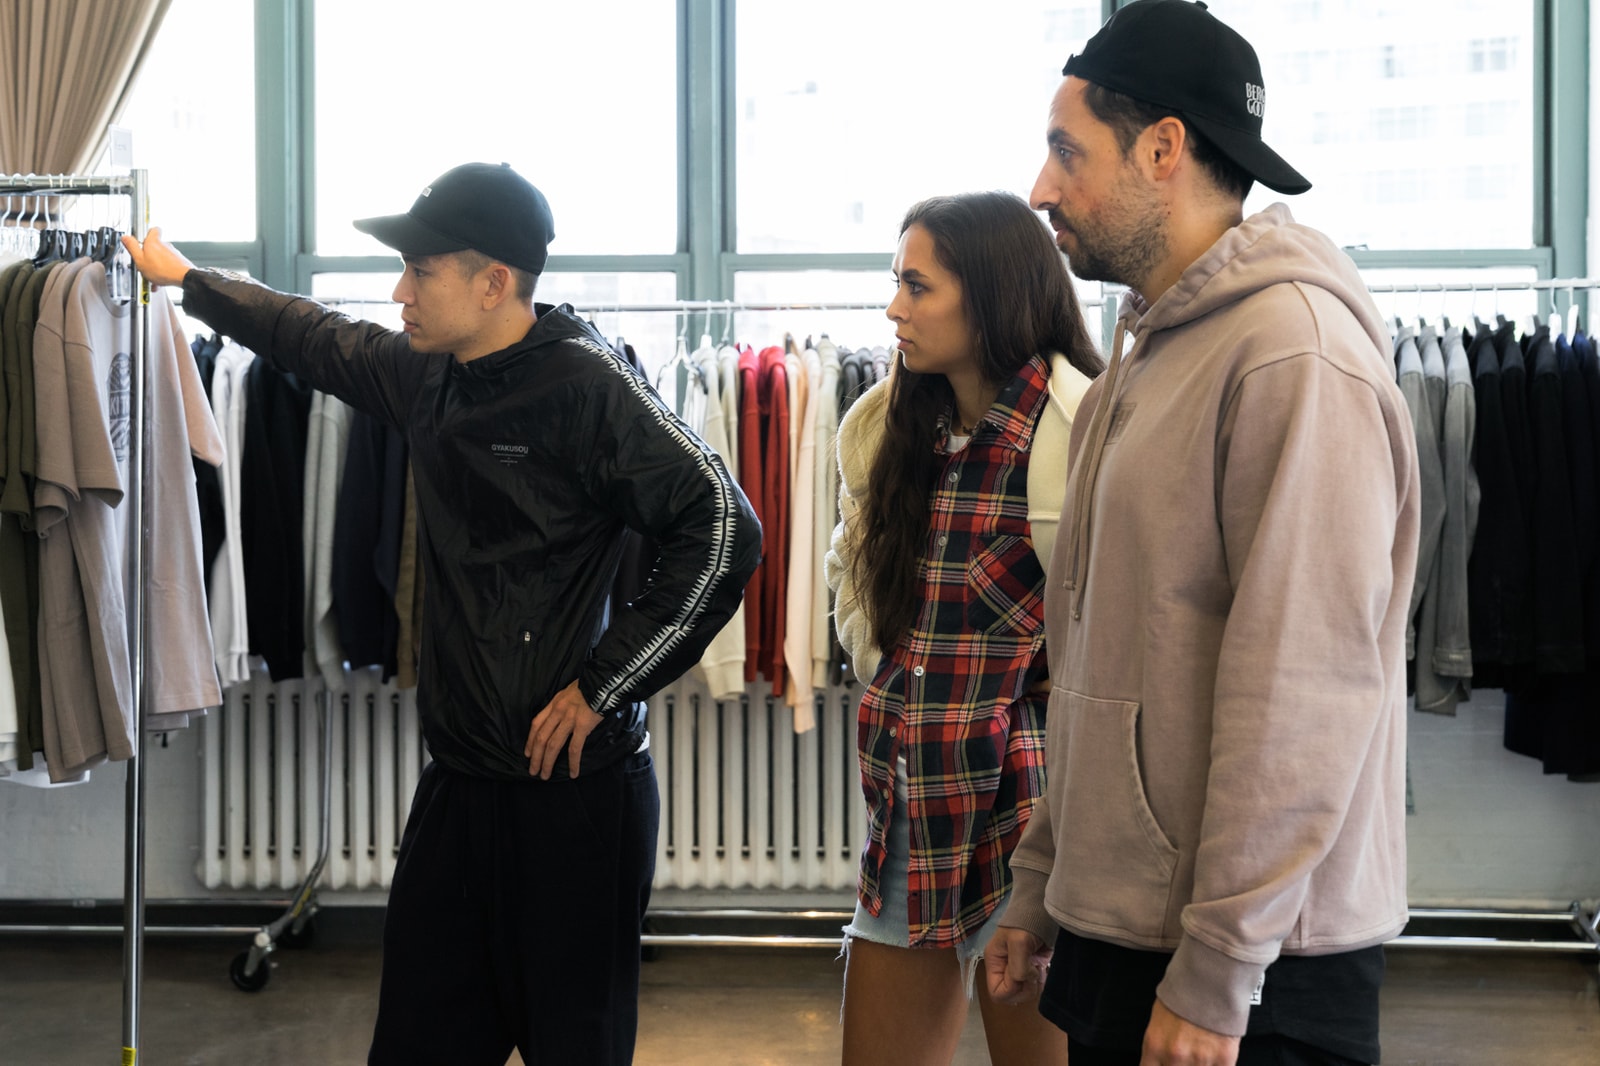 Emily Oberg KITH SPORT 2018 Spring Summer Show Behind the Scenes Casting Styling